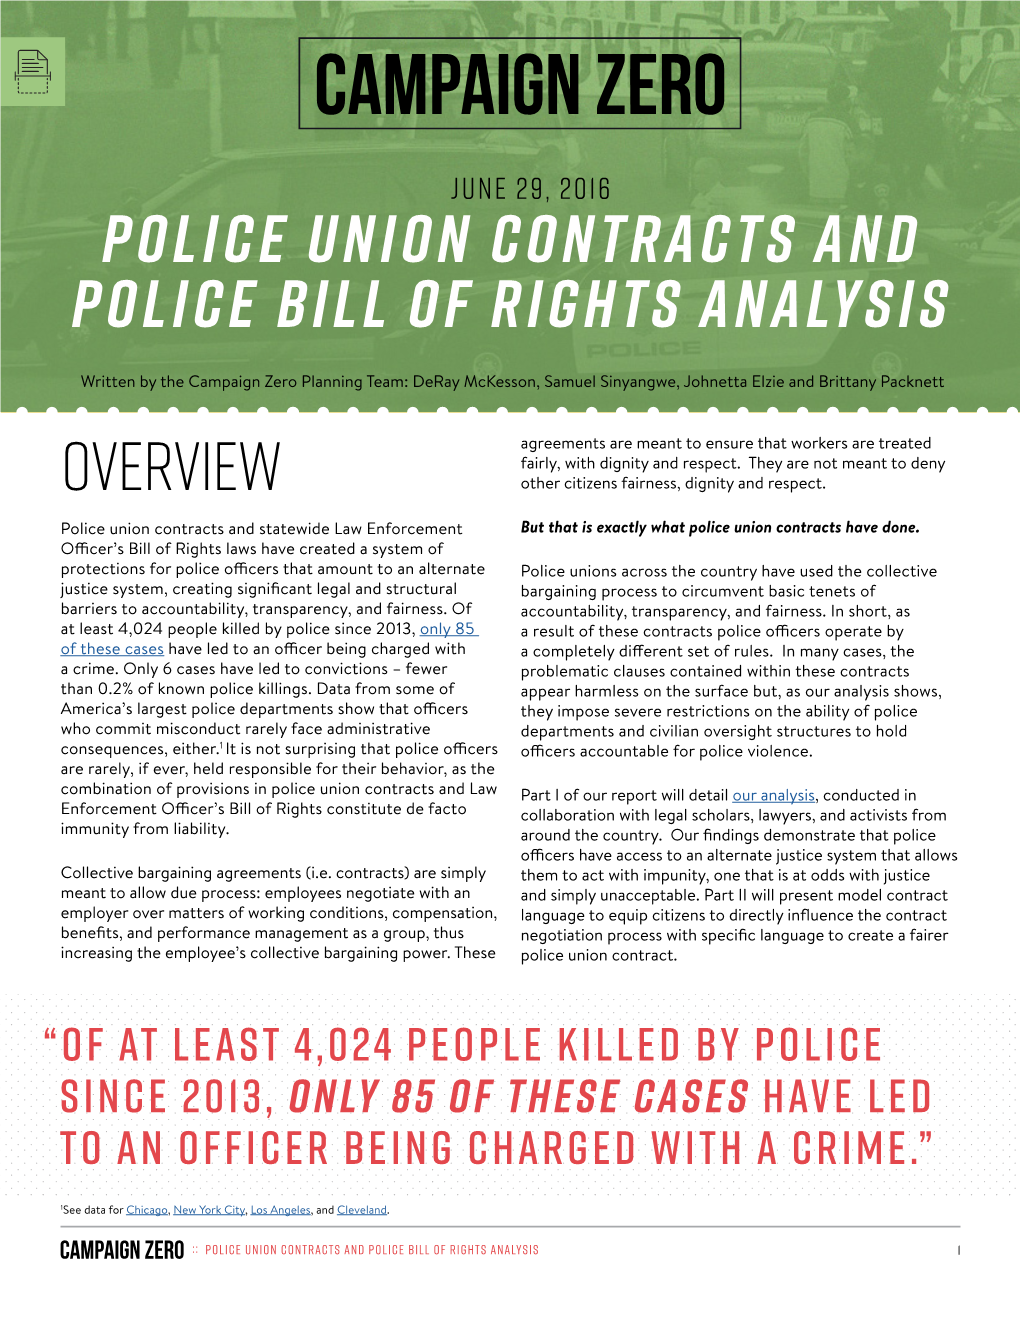 Police Union Contracts and Police Bill of Rights Analysis